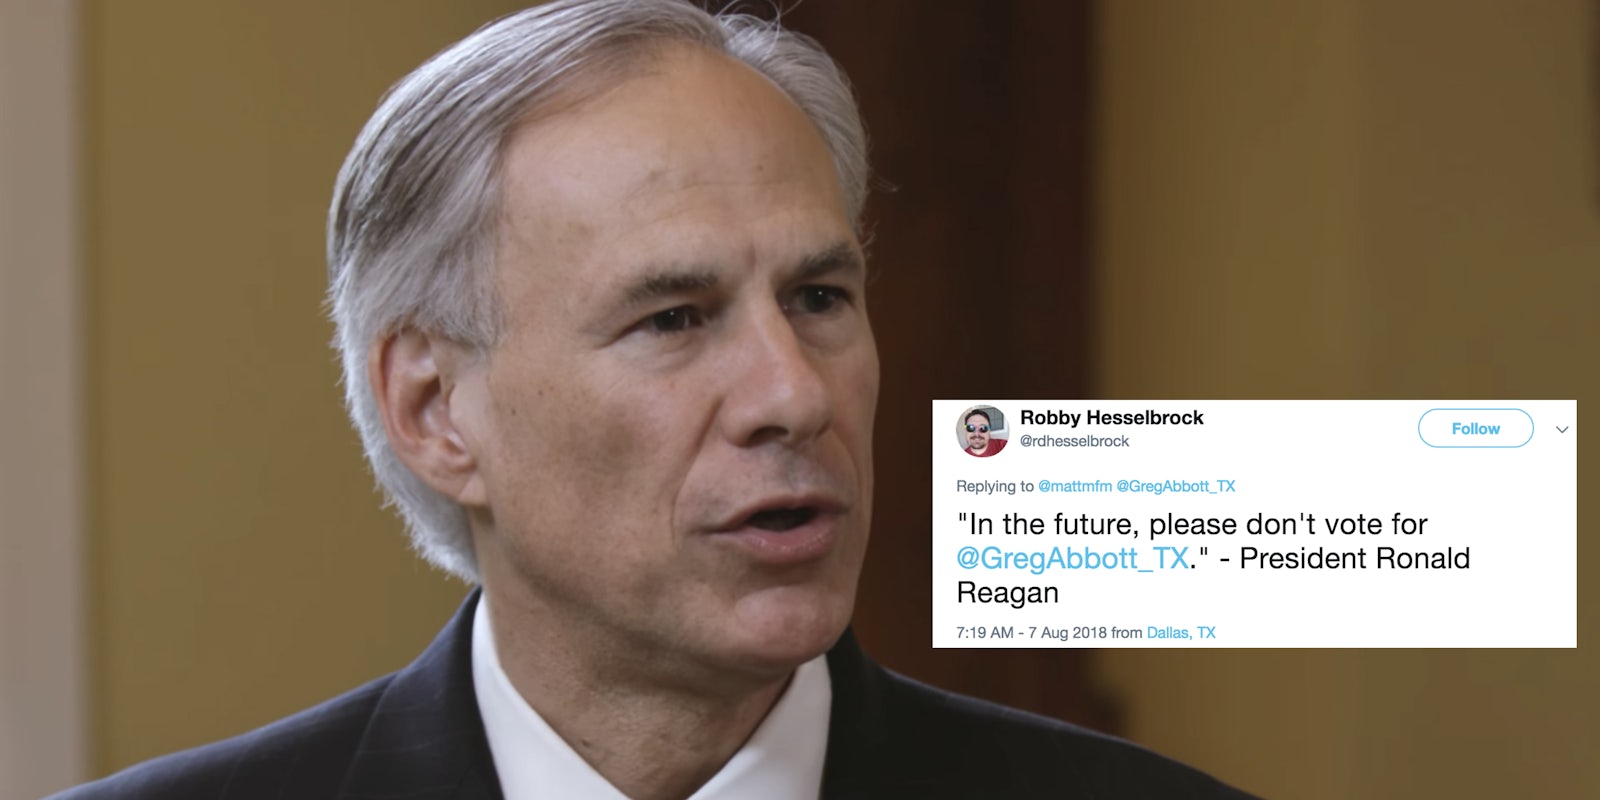 Greg Abbott is getting roasted for tweeting a fake Winston Churchill quote.